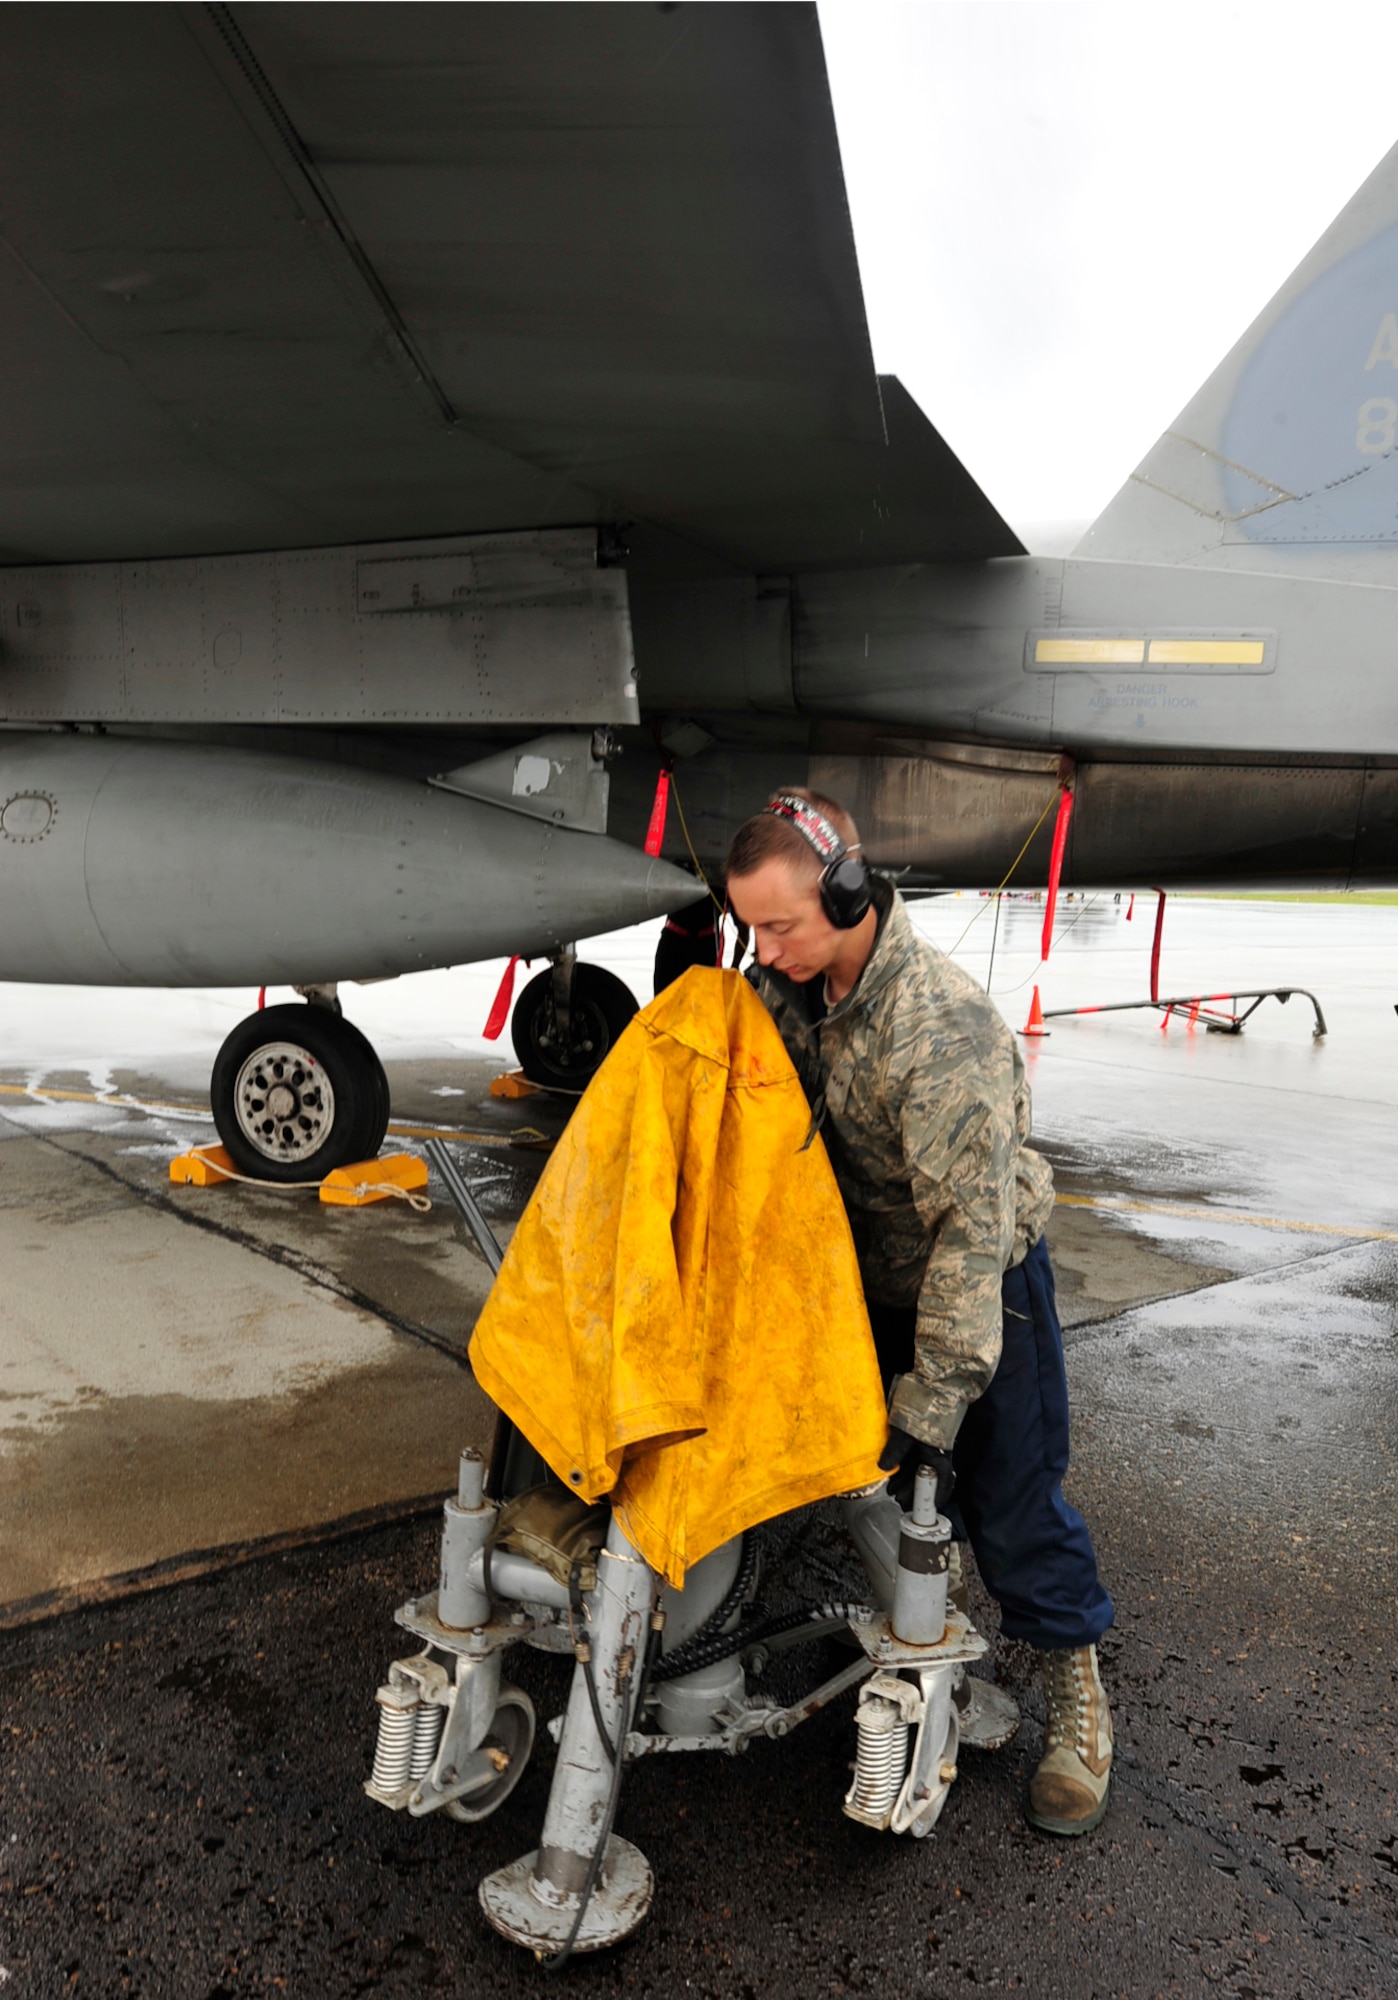 U.S. Air Force Airman 1st Class Cody Weller, a crew chief with the 18th Aircraft Maintenance Squadron, Kadena Air Base, Japan, completes a gear swings check on an F-15 Eagle during the Northern Edge Premier Joint Training Exercise at Eielson Air Force Base, Alaska, June 20.  Northern Edge first began in 1993, following a long tradition of exercises such as JACK FROST in 1975, BRIM FROST from 1981-1989 and Arctic Warrior from 1991-1992. (U.S. Air Force photo/ Staff Sgt. Lakisha A. Croley)